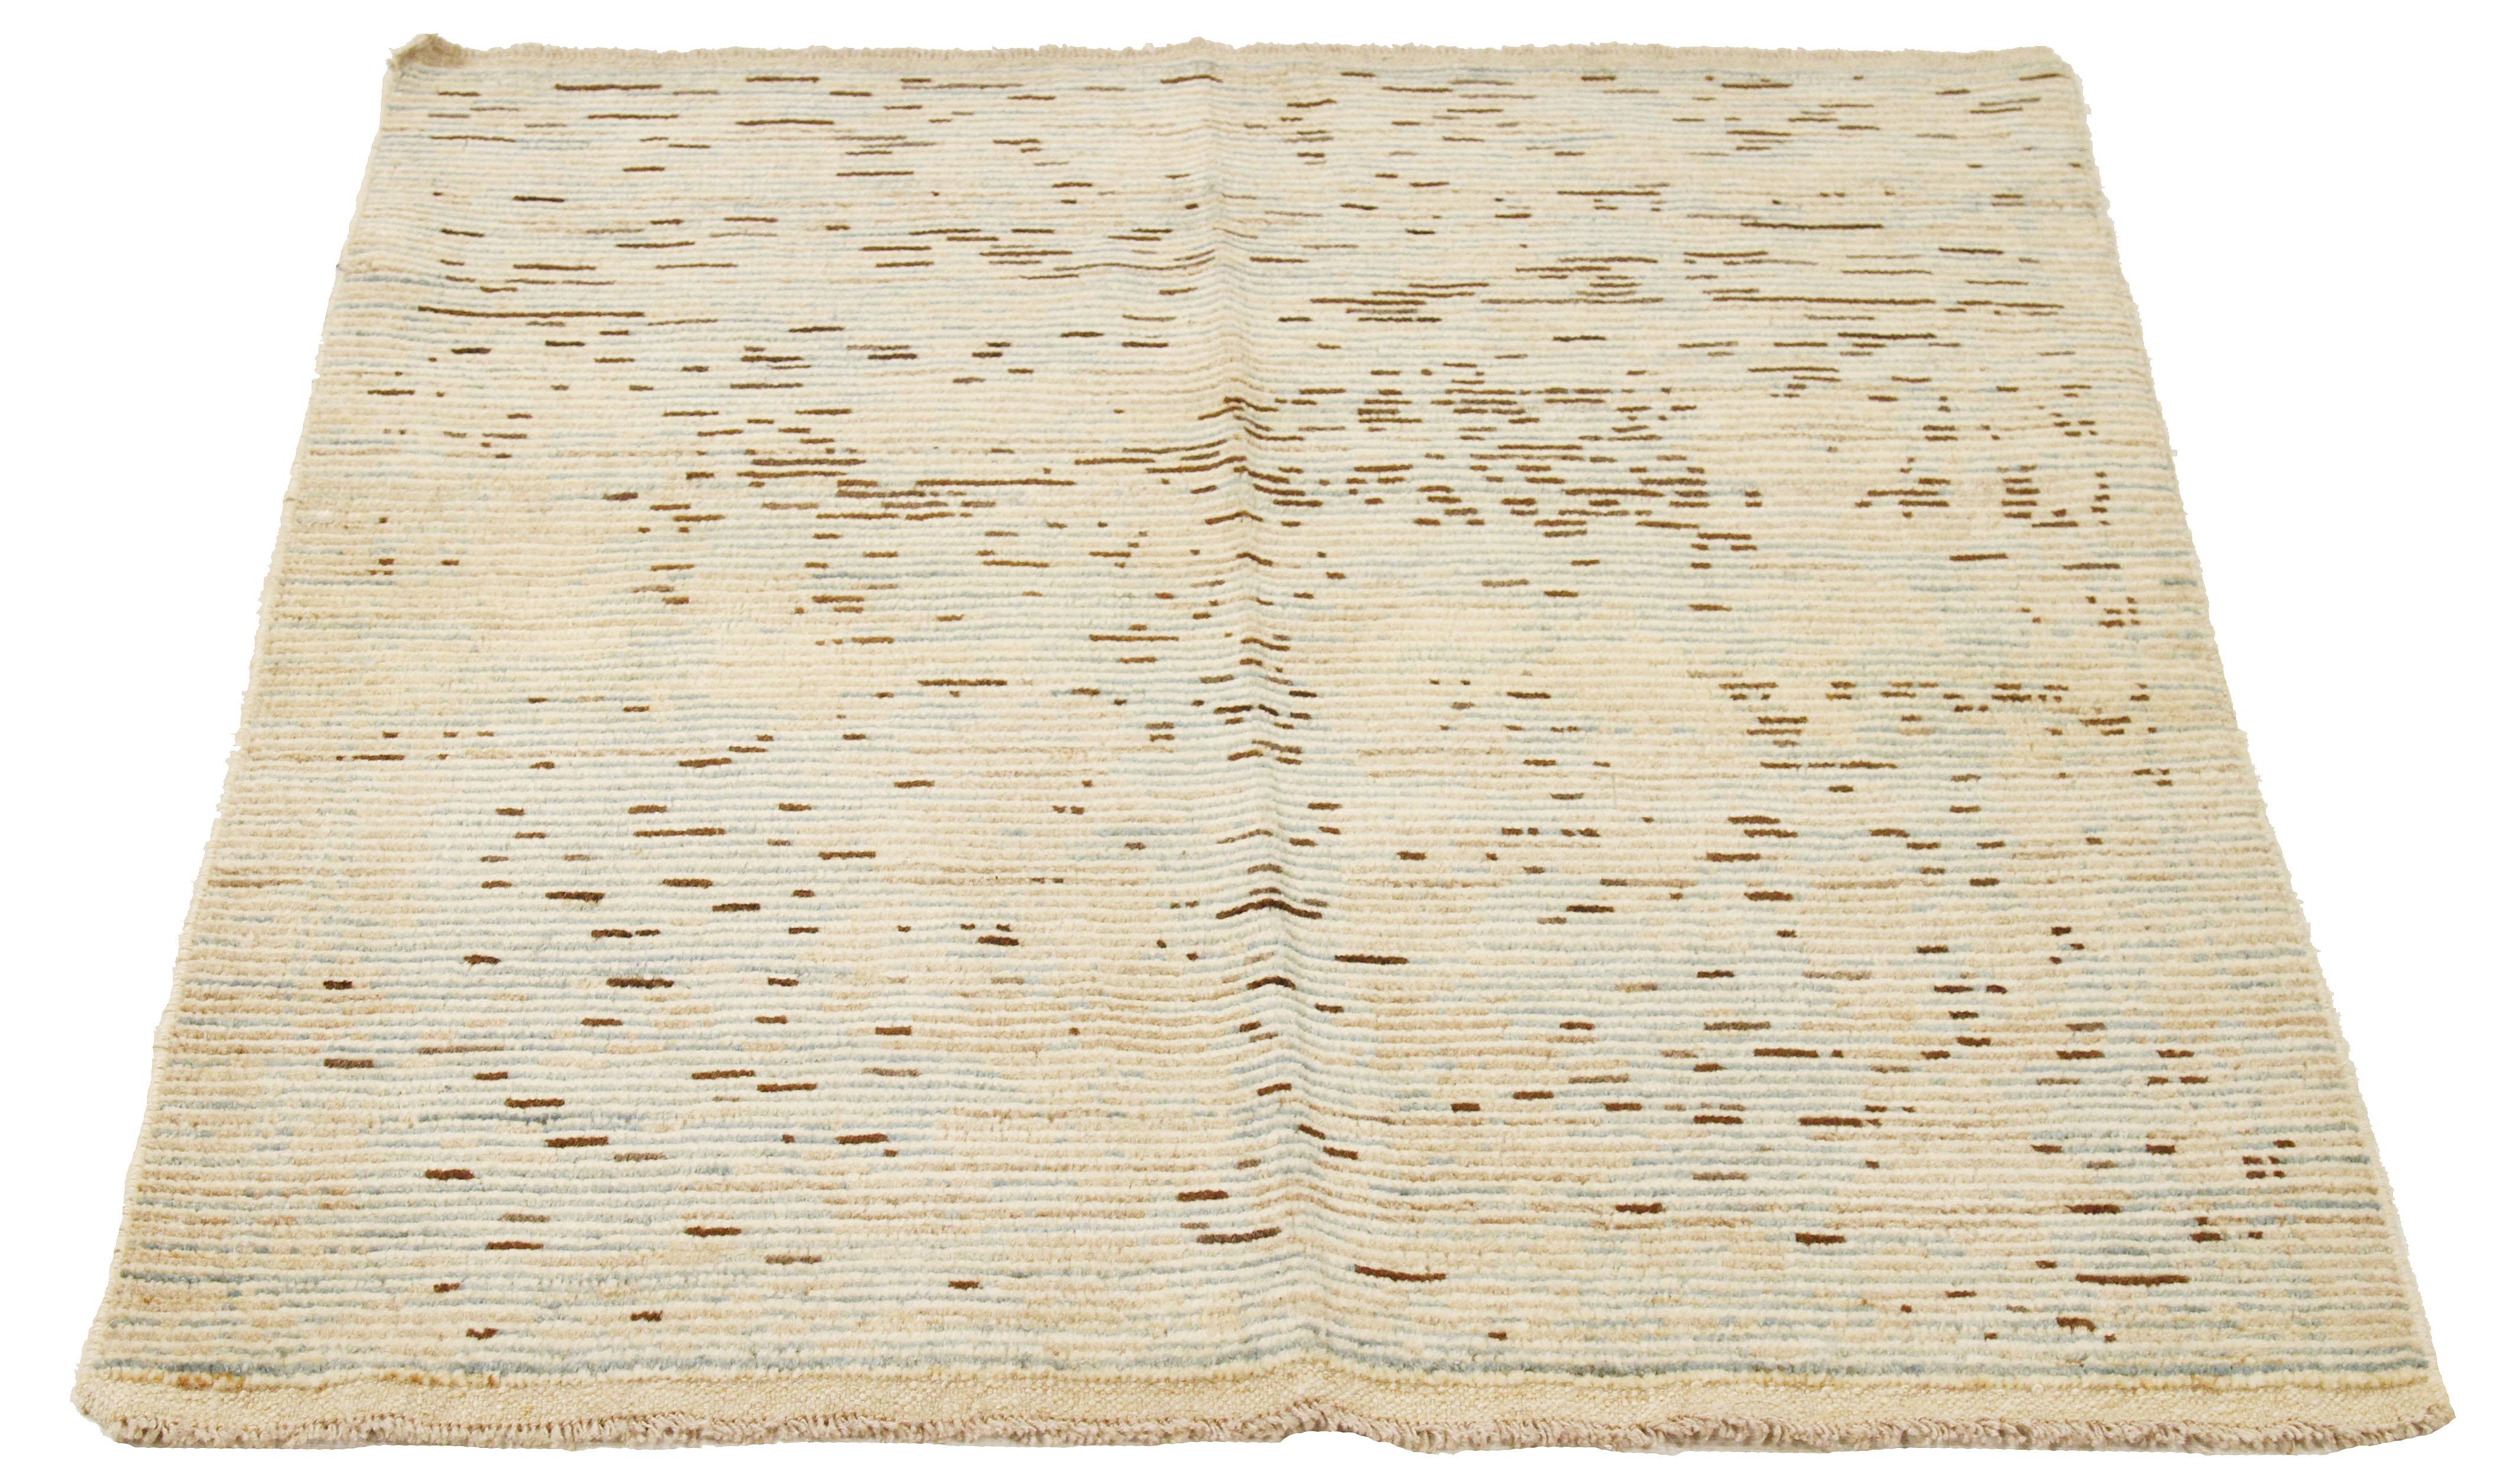 Contemporary handmade Turkish area rug from high-quality sheep’s wool and colored with eco-friendly vegetable dyes that are proven safe for humans and pets alike. It’s a modern design using Sultanabad weaving showcasing a regal ivory field with gray